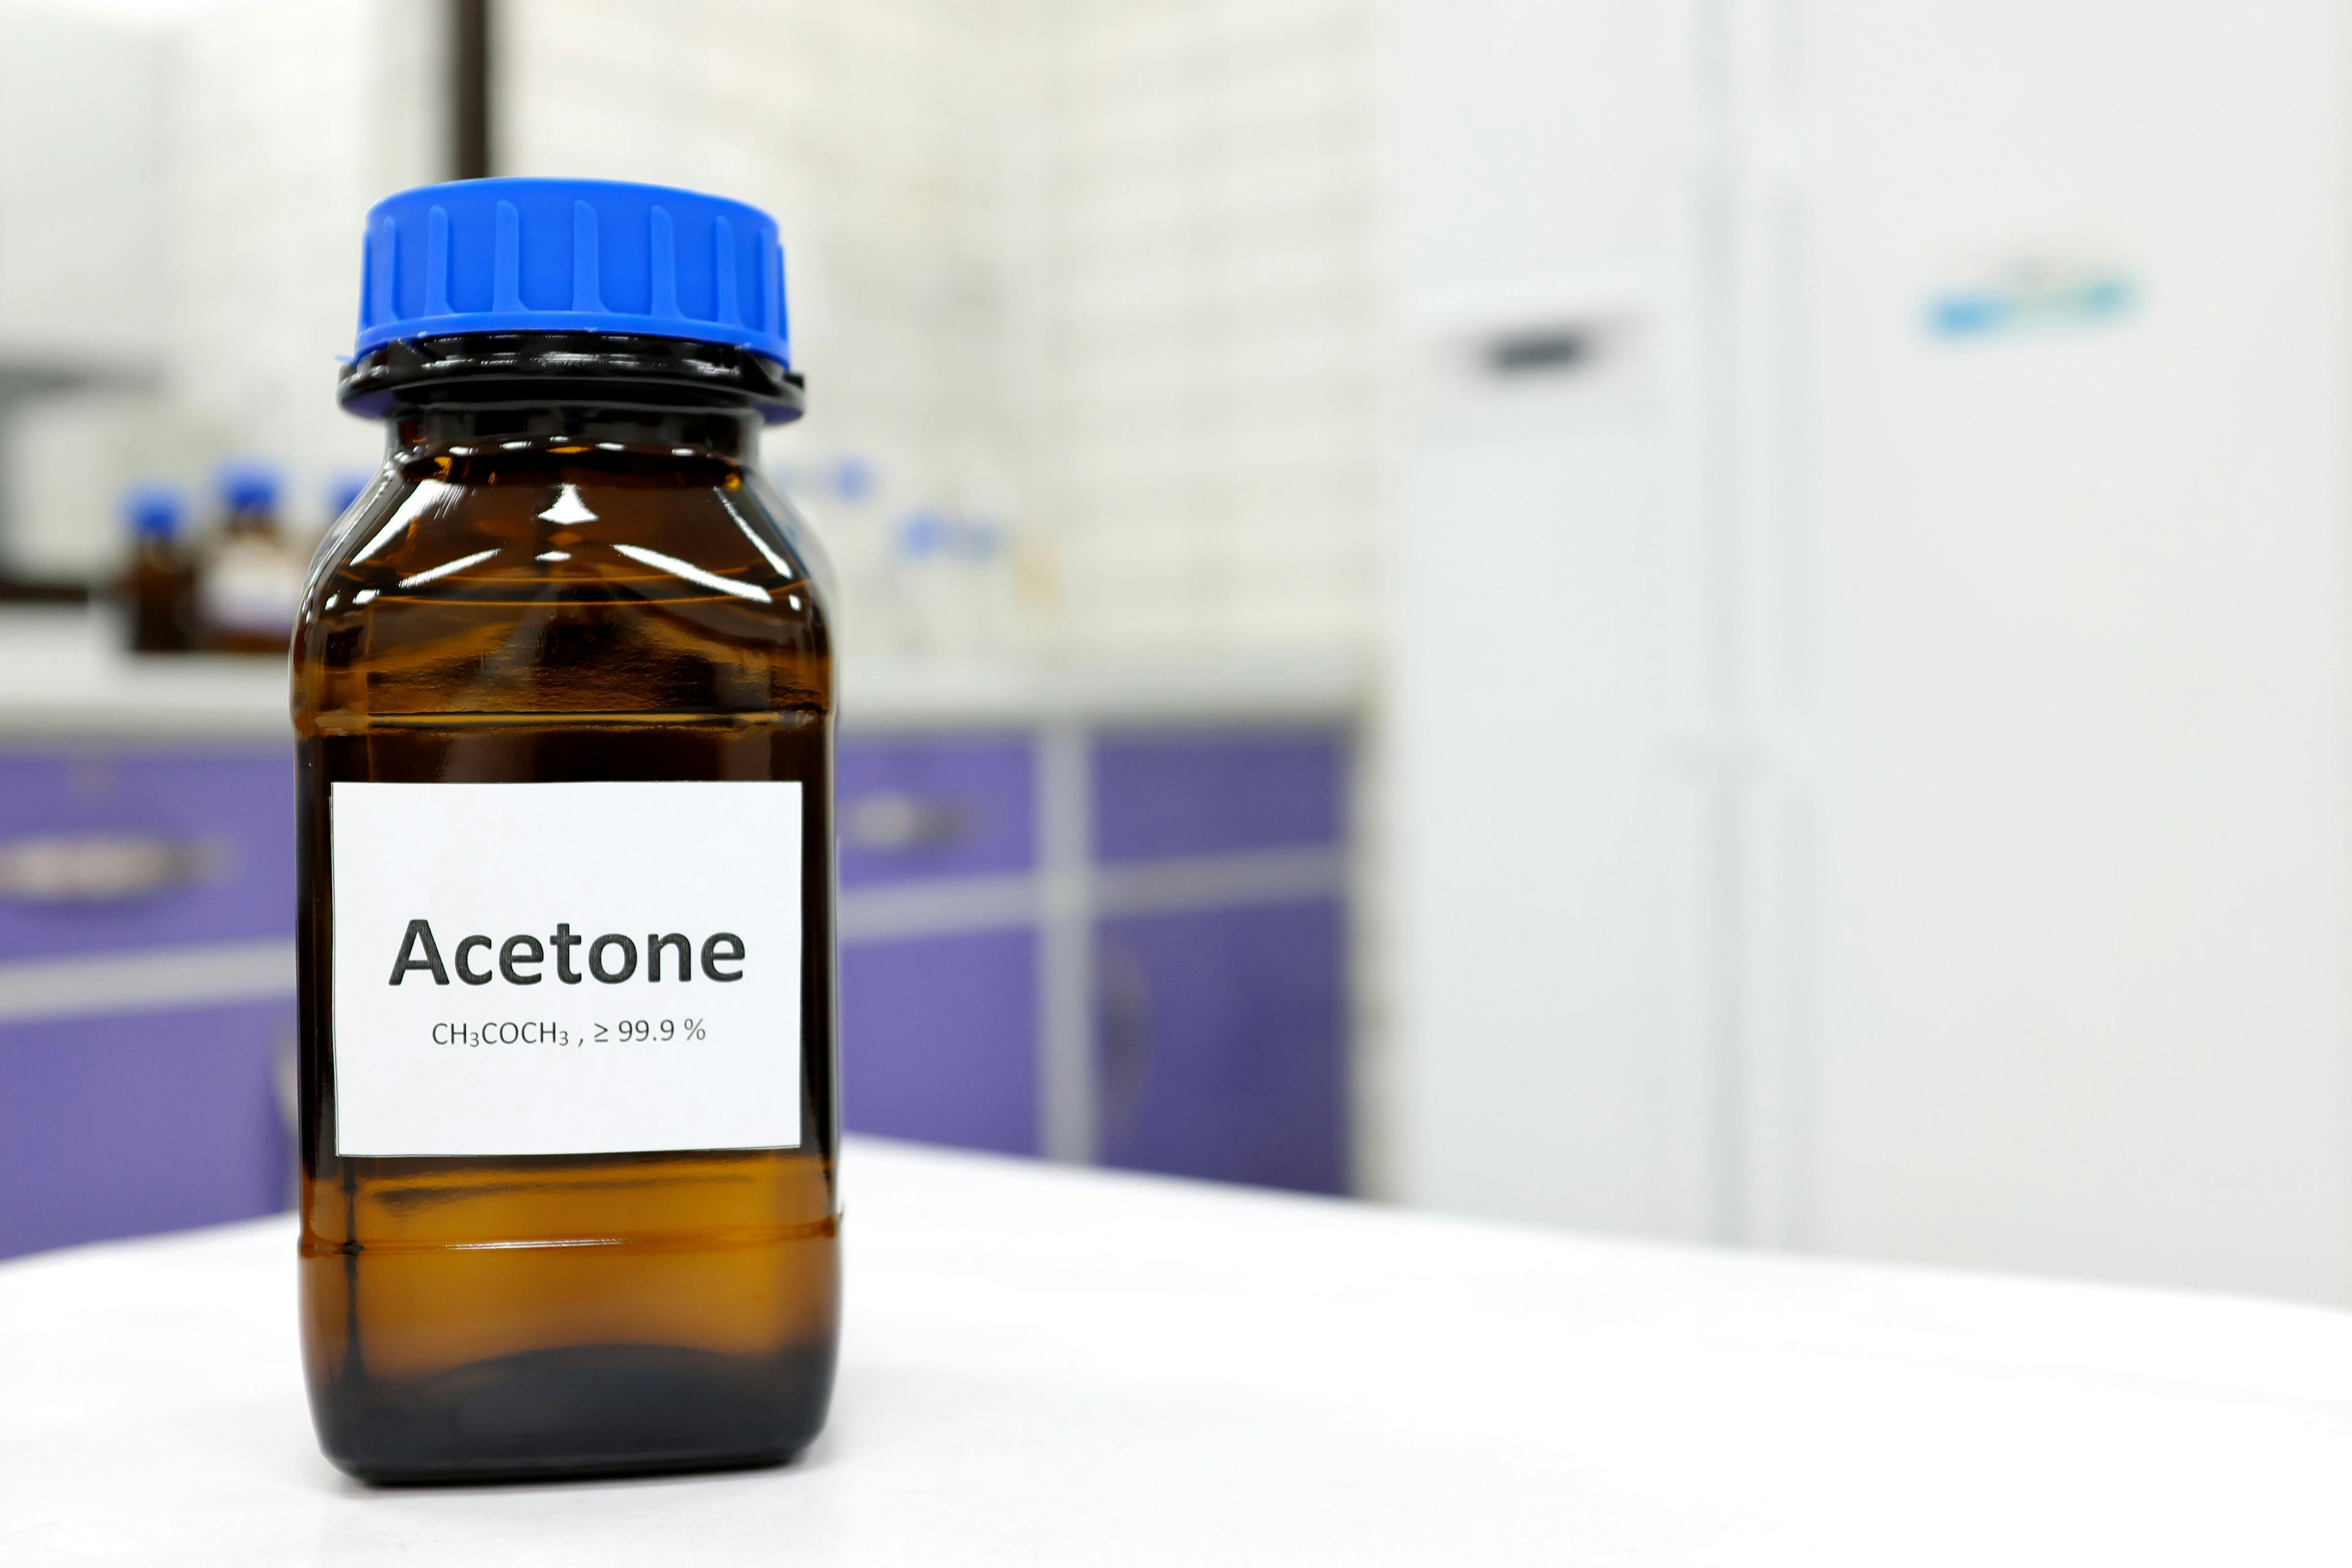 Selective focus of pure acetone solution in brown glass amber bottle inside a chemistry laboratory. White background with copy space. | Image Credit: © sulit.photos - stock.adobe.com